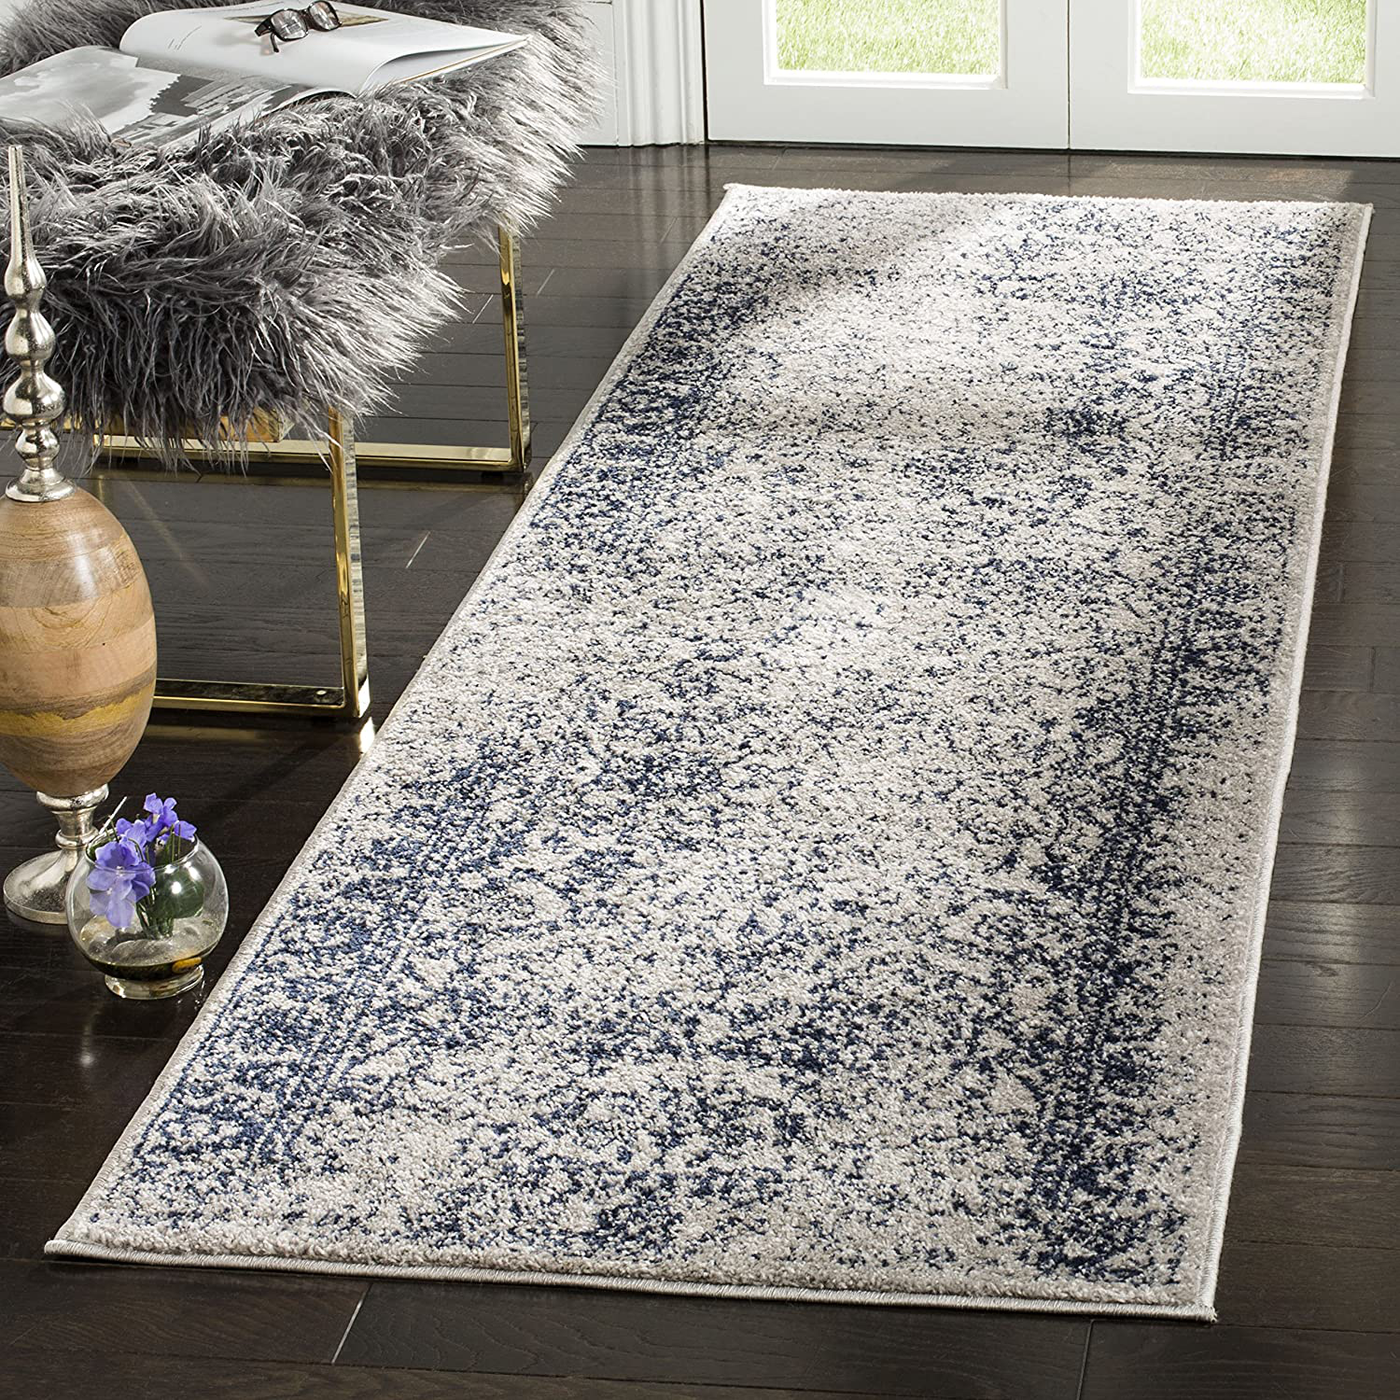 Safavieh Adirondack Collection ADR109P Oriental Distressed Non-Shedding Stain Resistant Living Room Bedroom Runner, 2'6" x 8' , Grey / Navy